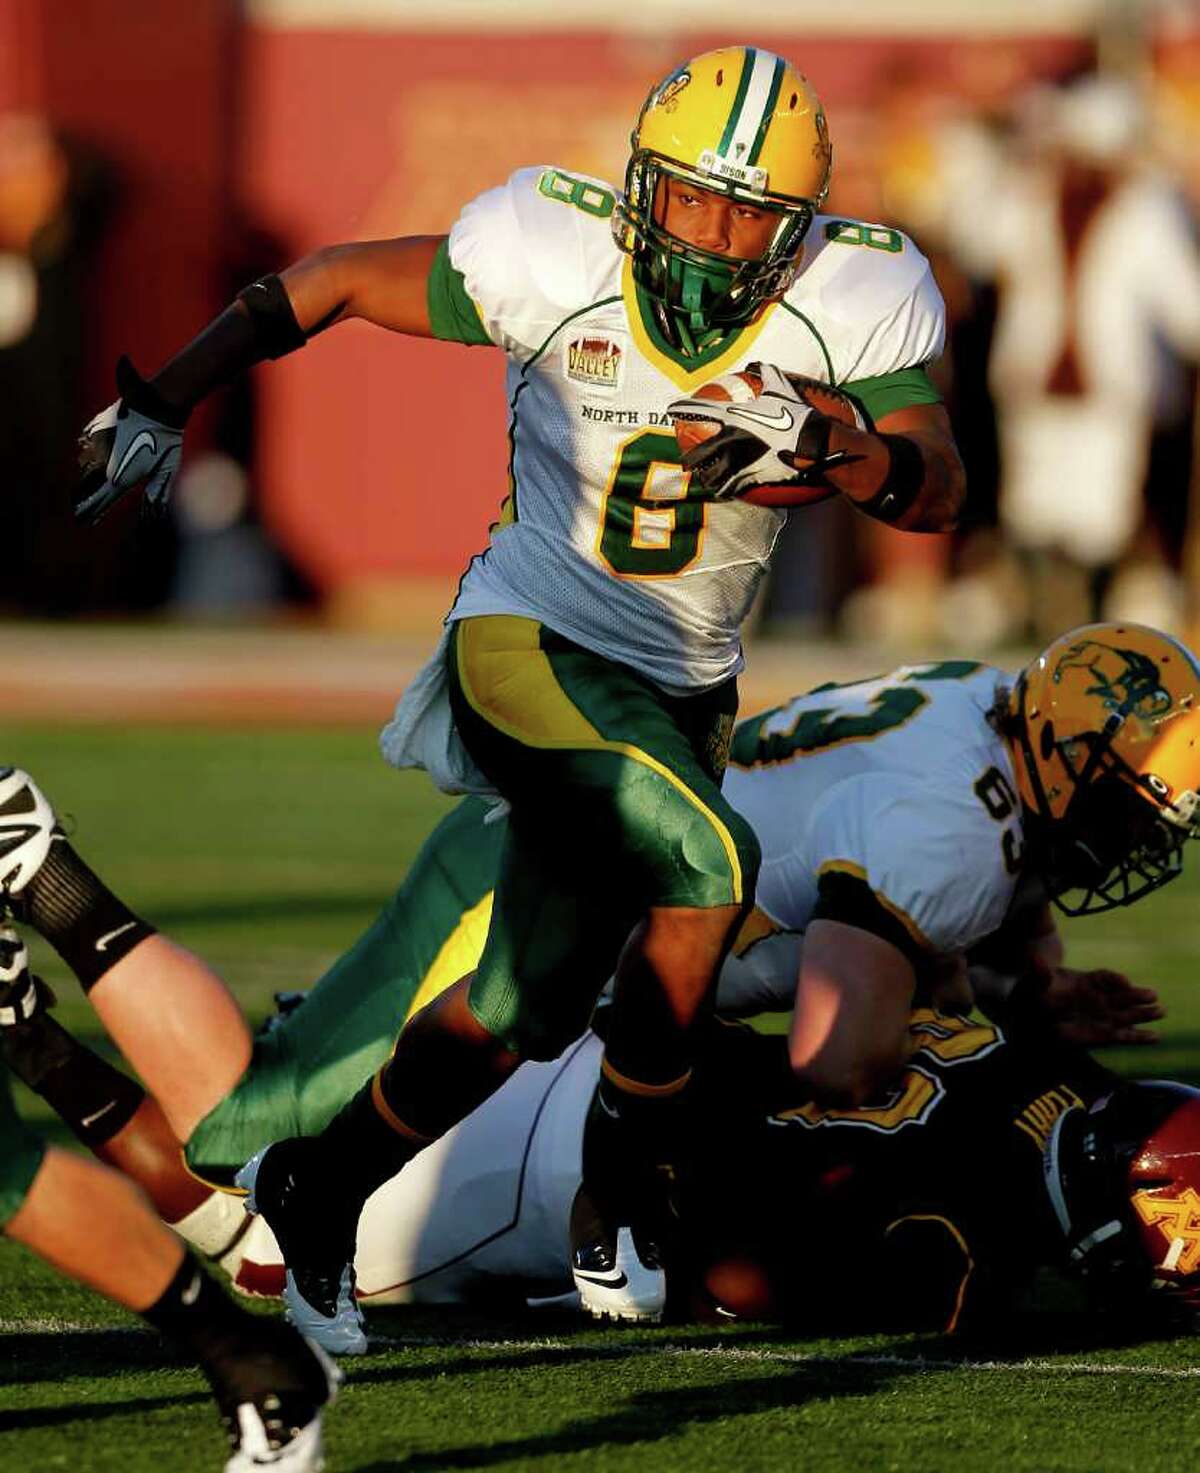 North Dakota State running back D.J. McNorton runs in the first quarter of their NCAA college football game against Minnesota, Saturday, Sept. 24, 2011, in Minneapolis. (AP Photo/Andy King)